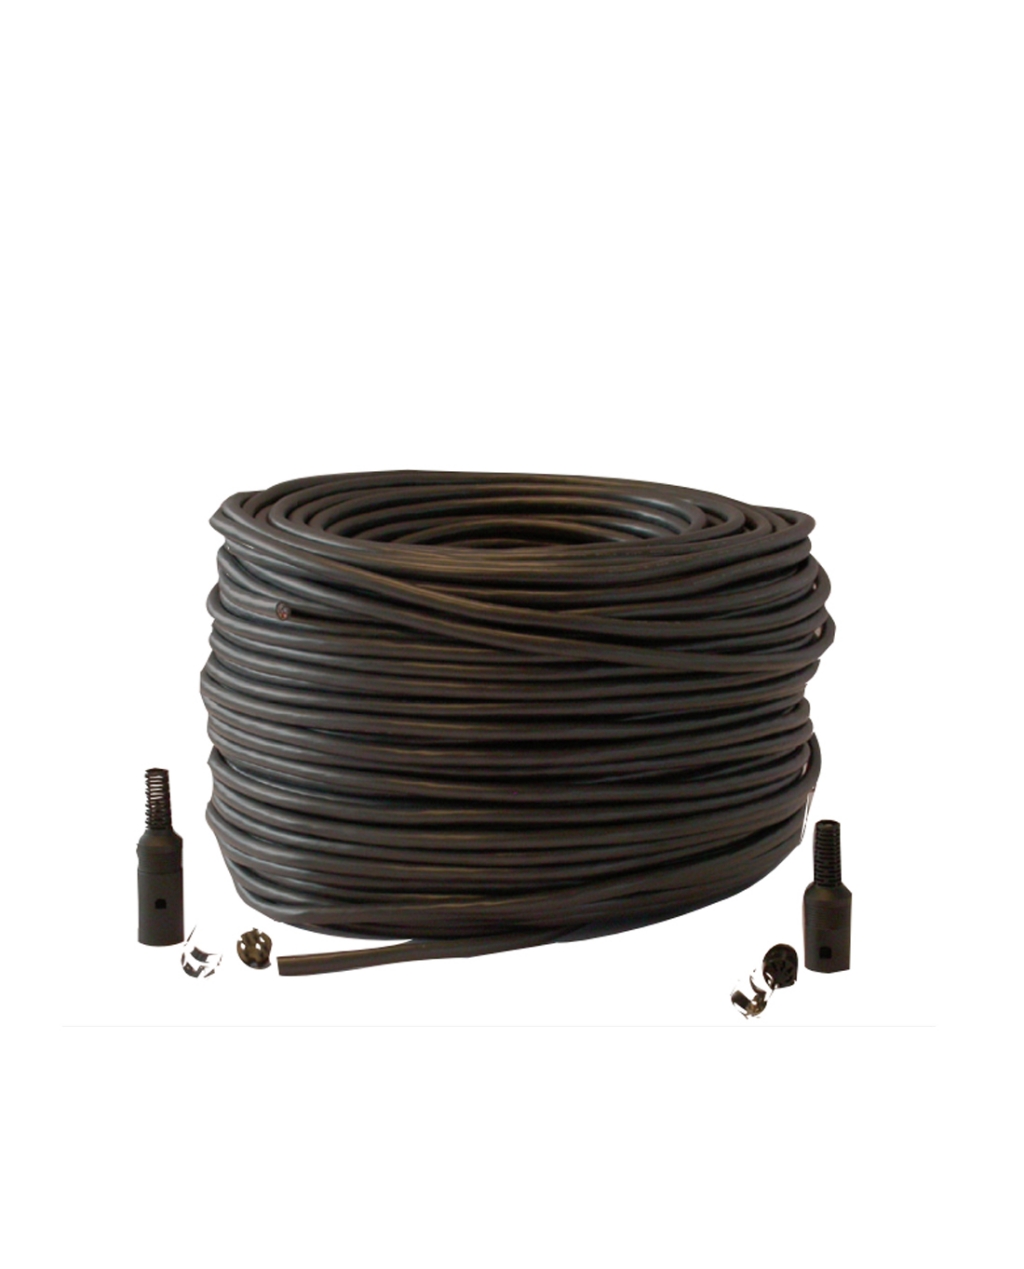 LBB 3316/00 –Installation cable, 100M (supplied w/ 5 sets connectors)